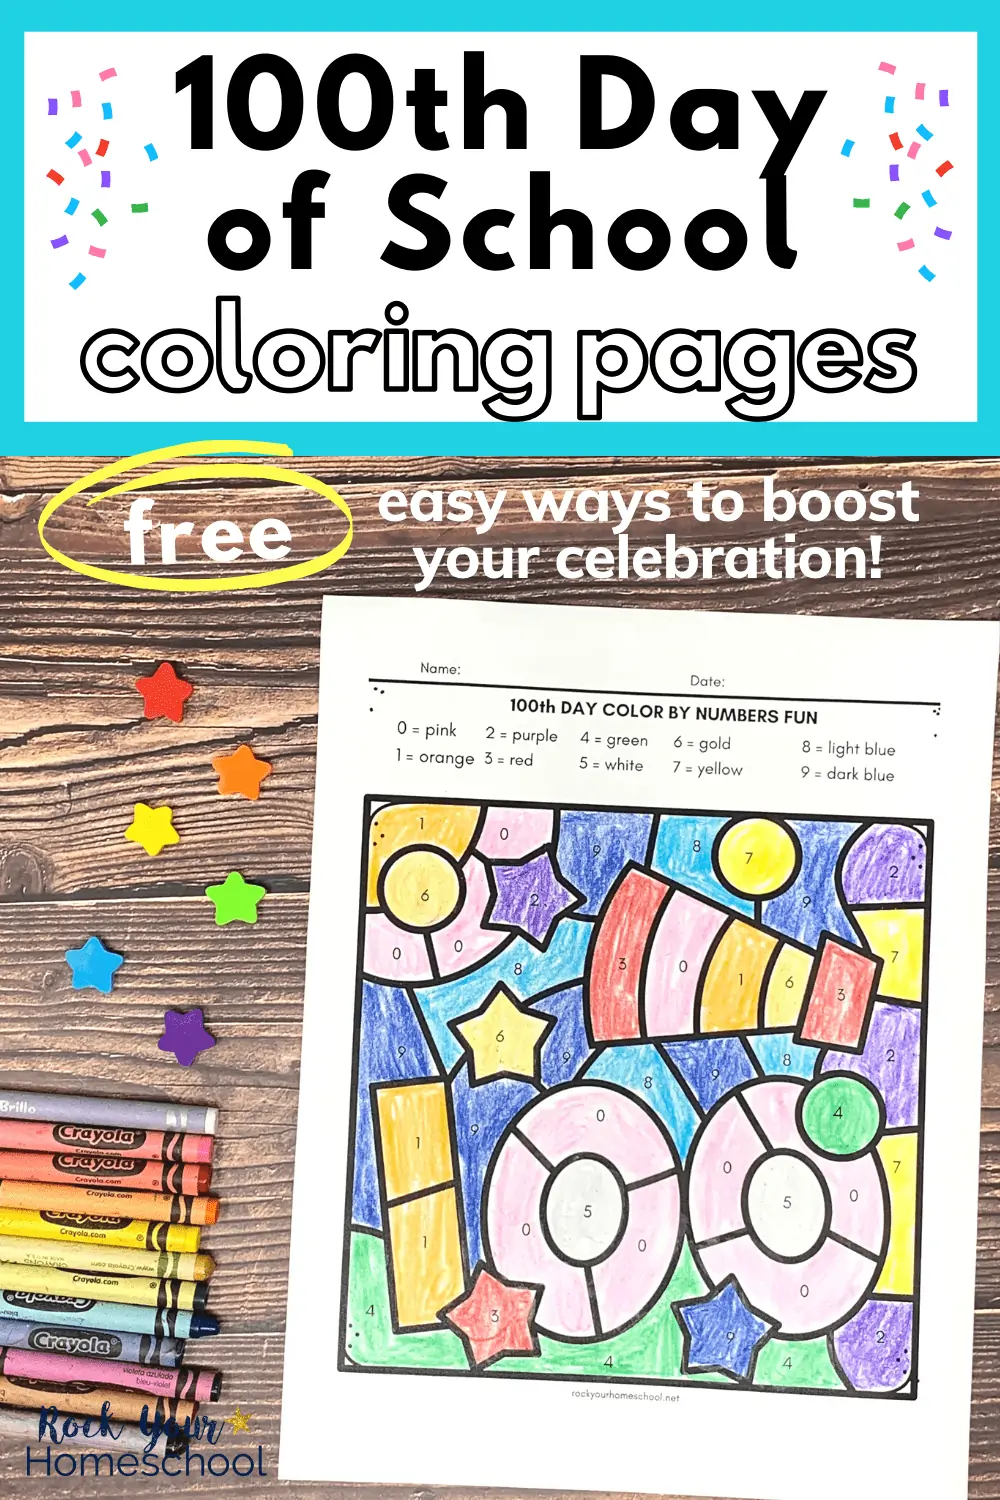 100th Day of School Coloring Pages for Fun Activities (Free)